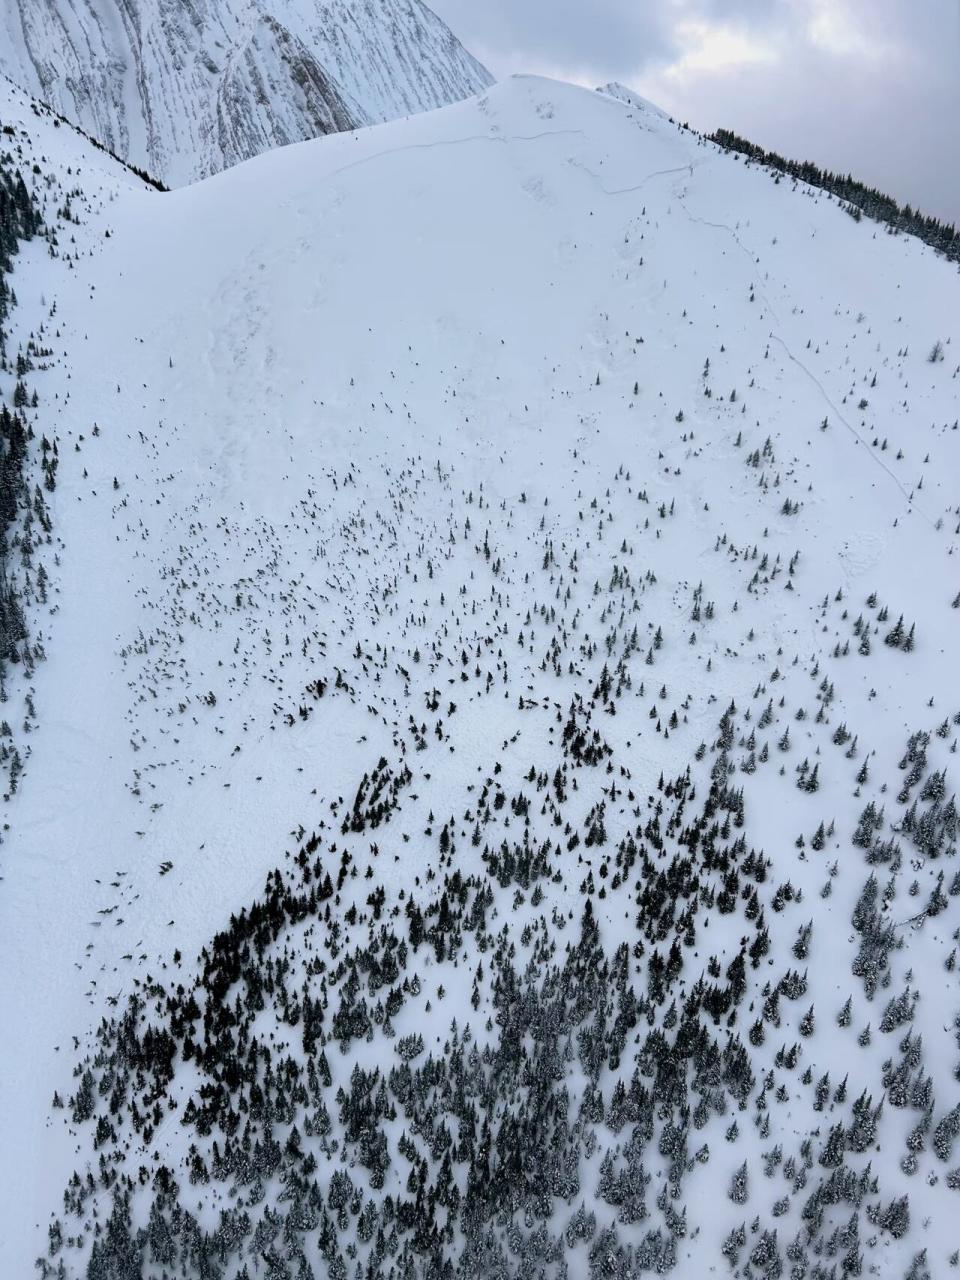 An aerial view of the avalanche on a mountain known as The Tower in Alberta's Kananaskis Country.